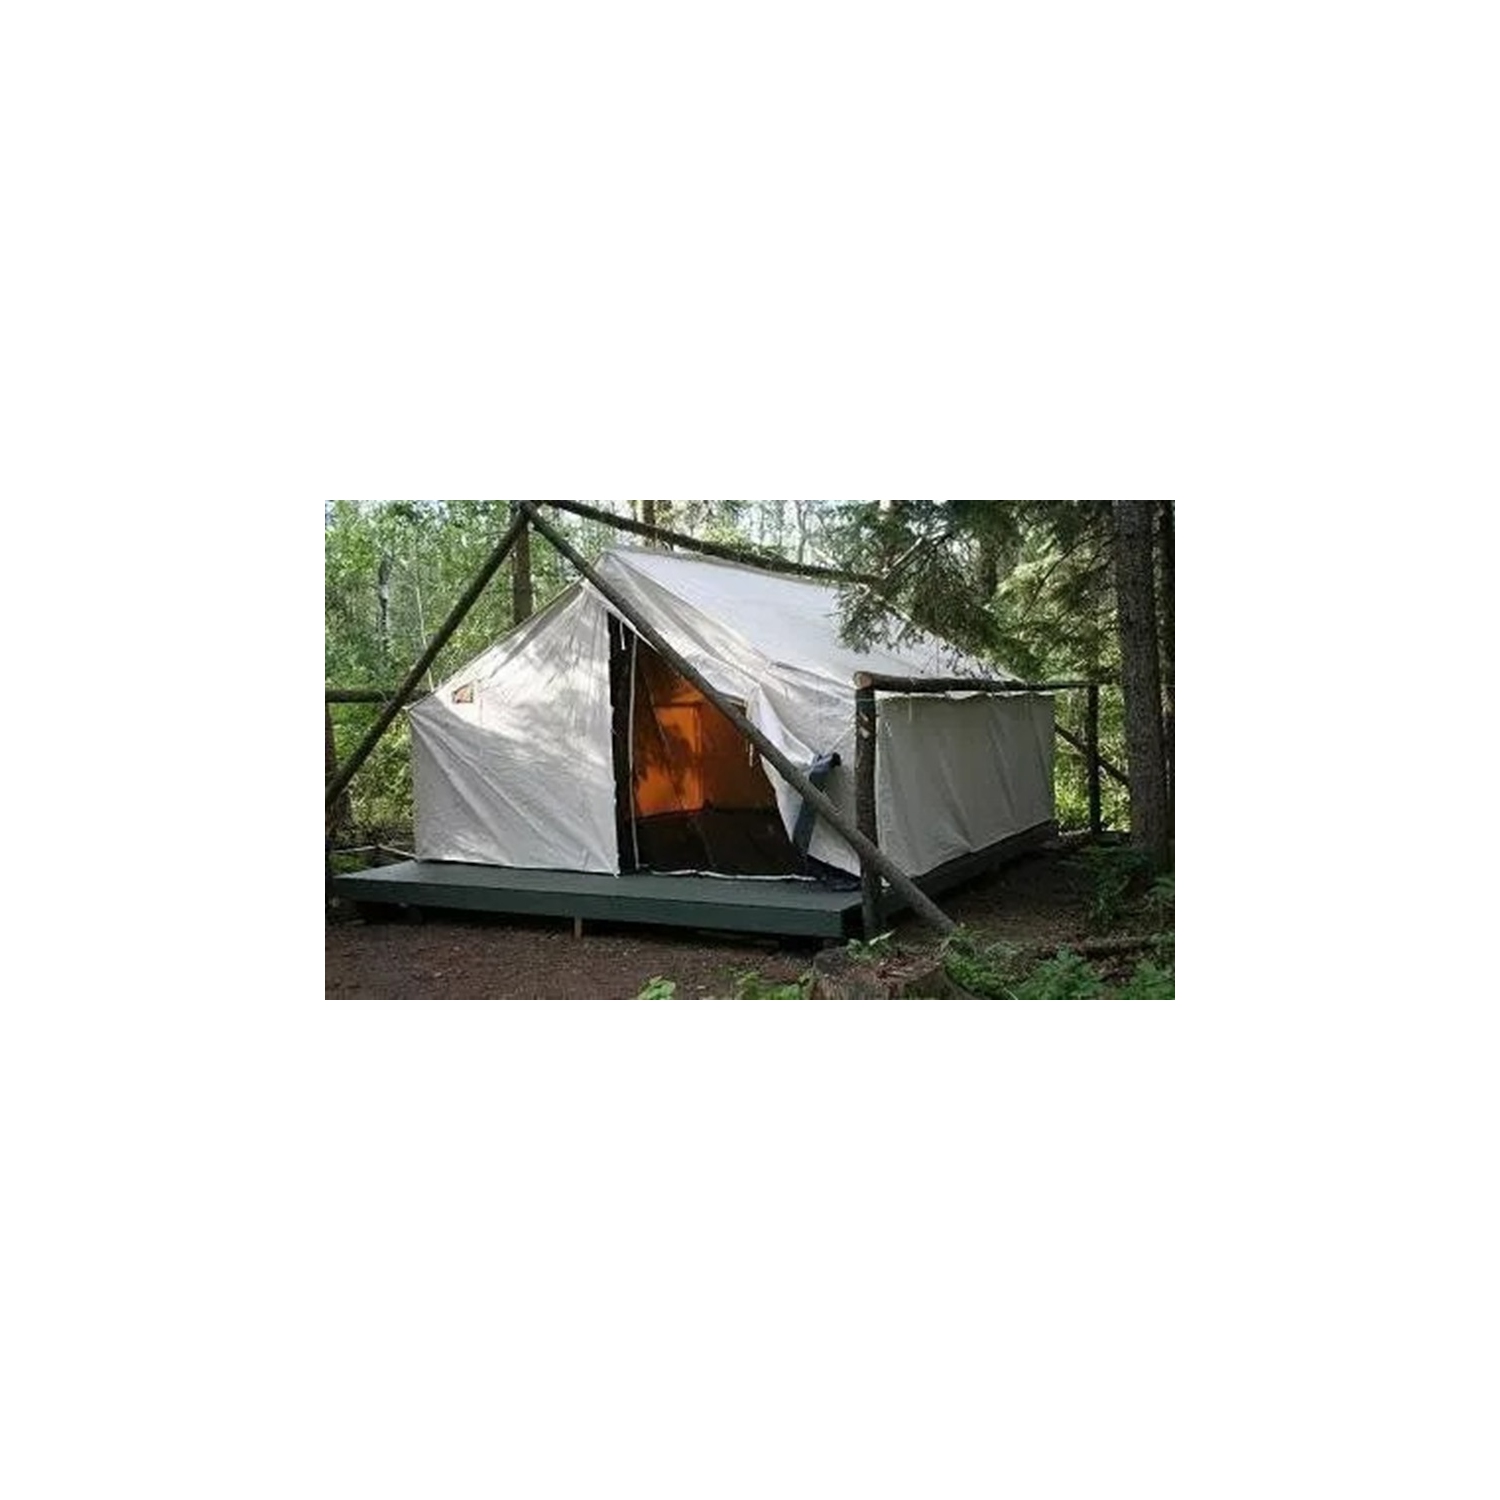 Grizzly Outfitters Canvas Wall Tent/Hunting Tent 14 x 16 x 7.5' x 4'